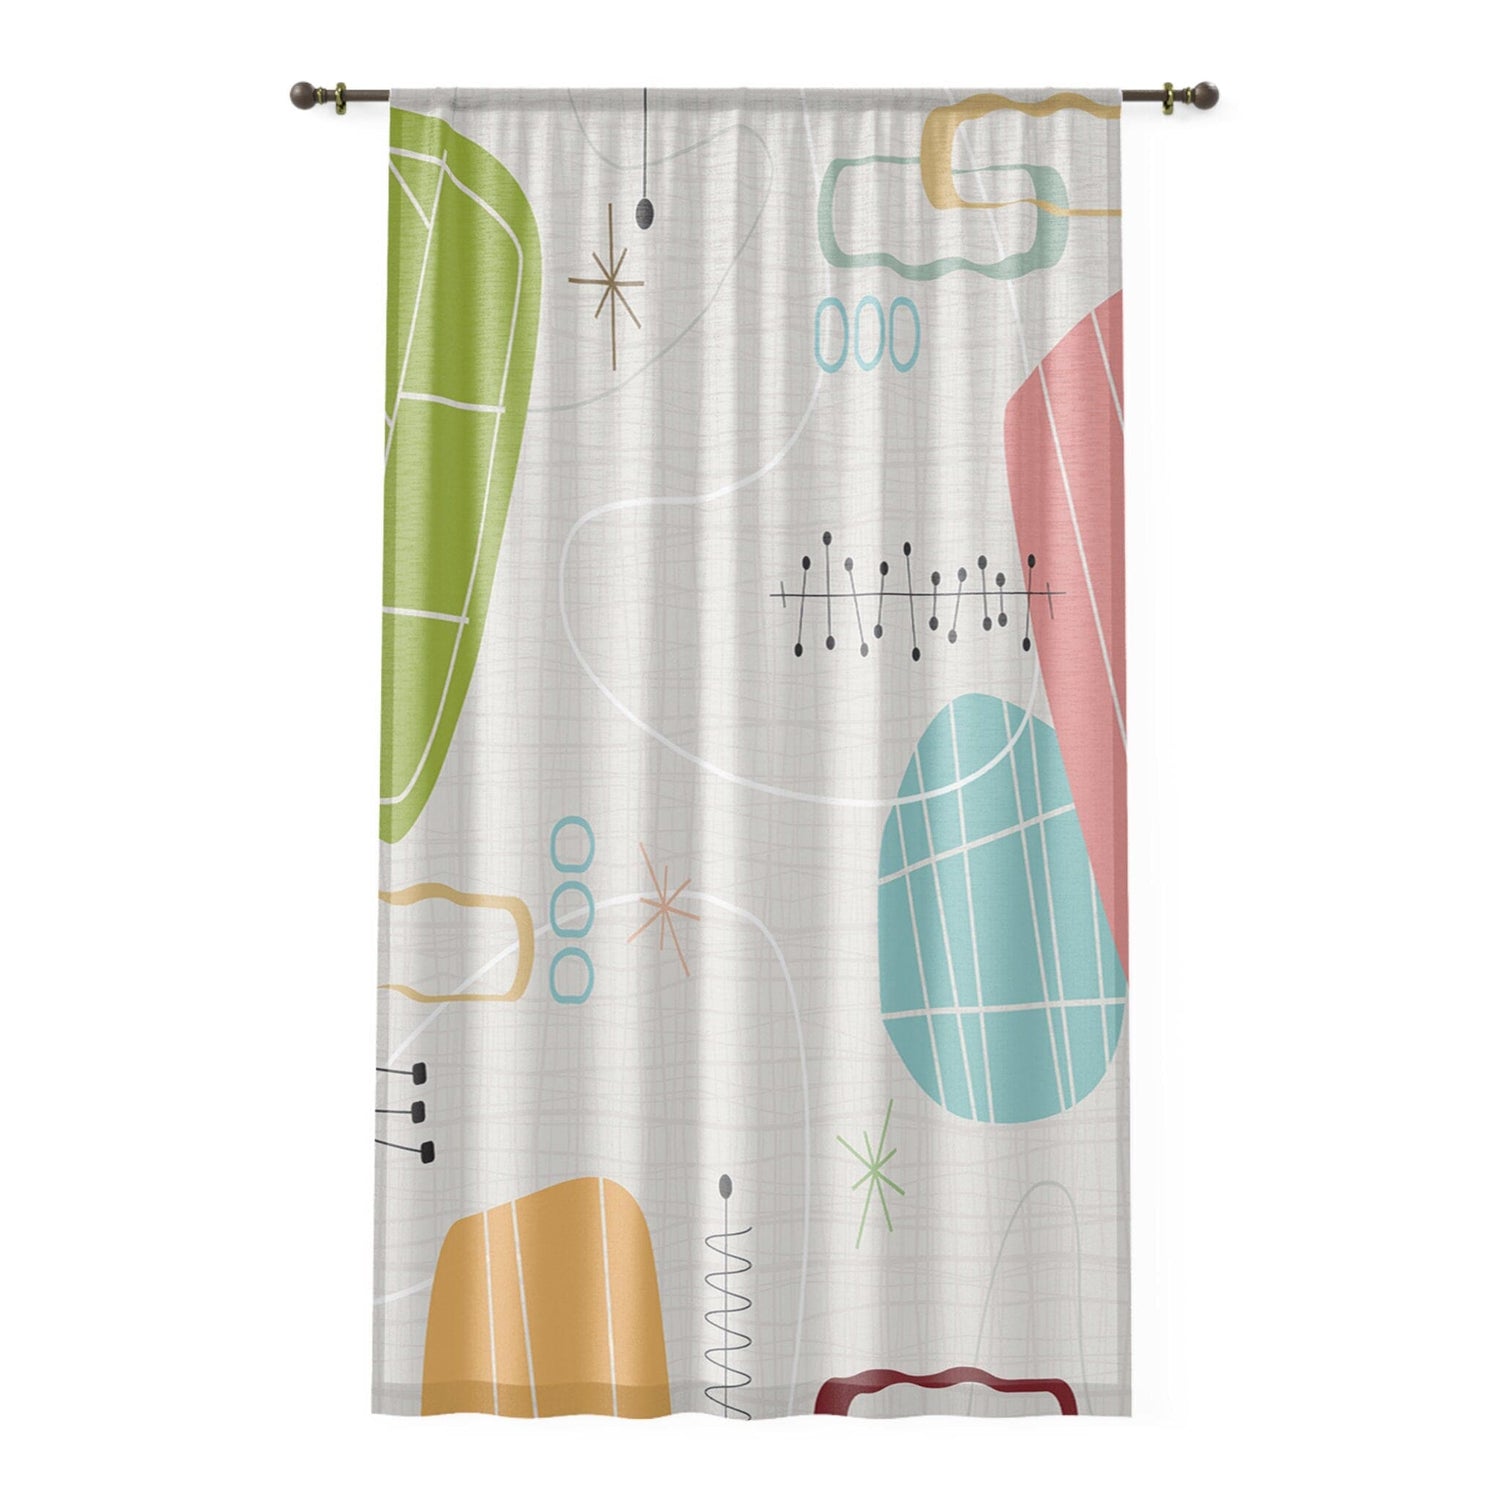 Kate McEnroe New York 1950s Mid Century Modern Abstract Window Curtains in Retro Teal, Lime Green, Coral, Light Gray Window Curtains